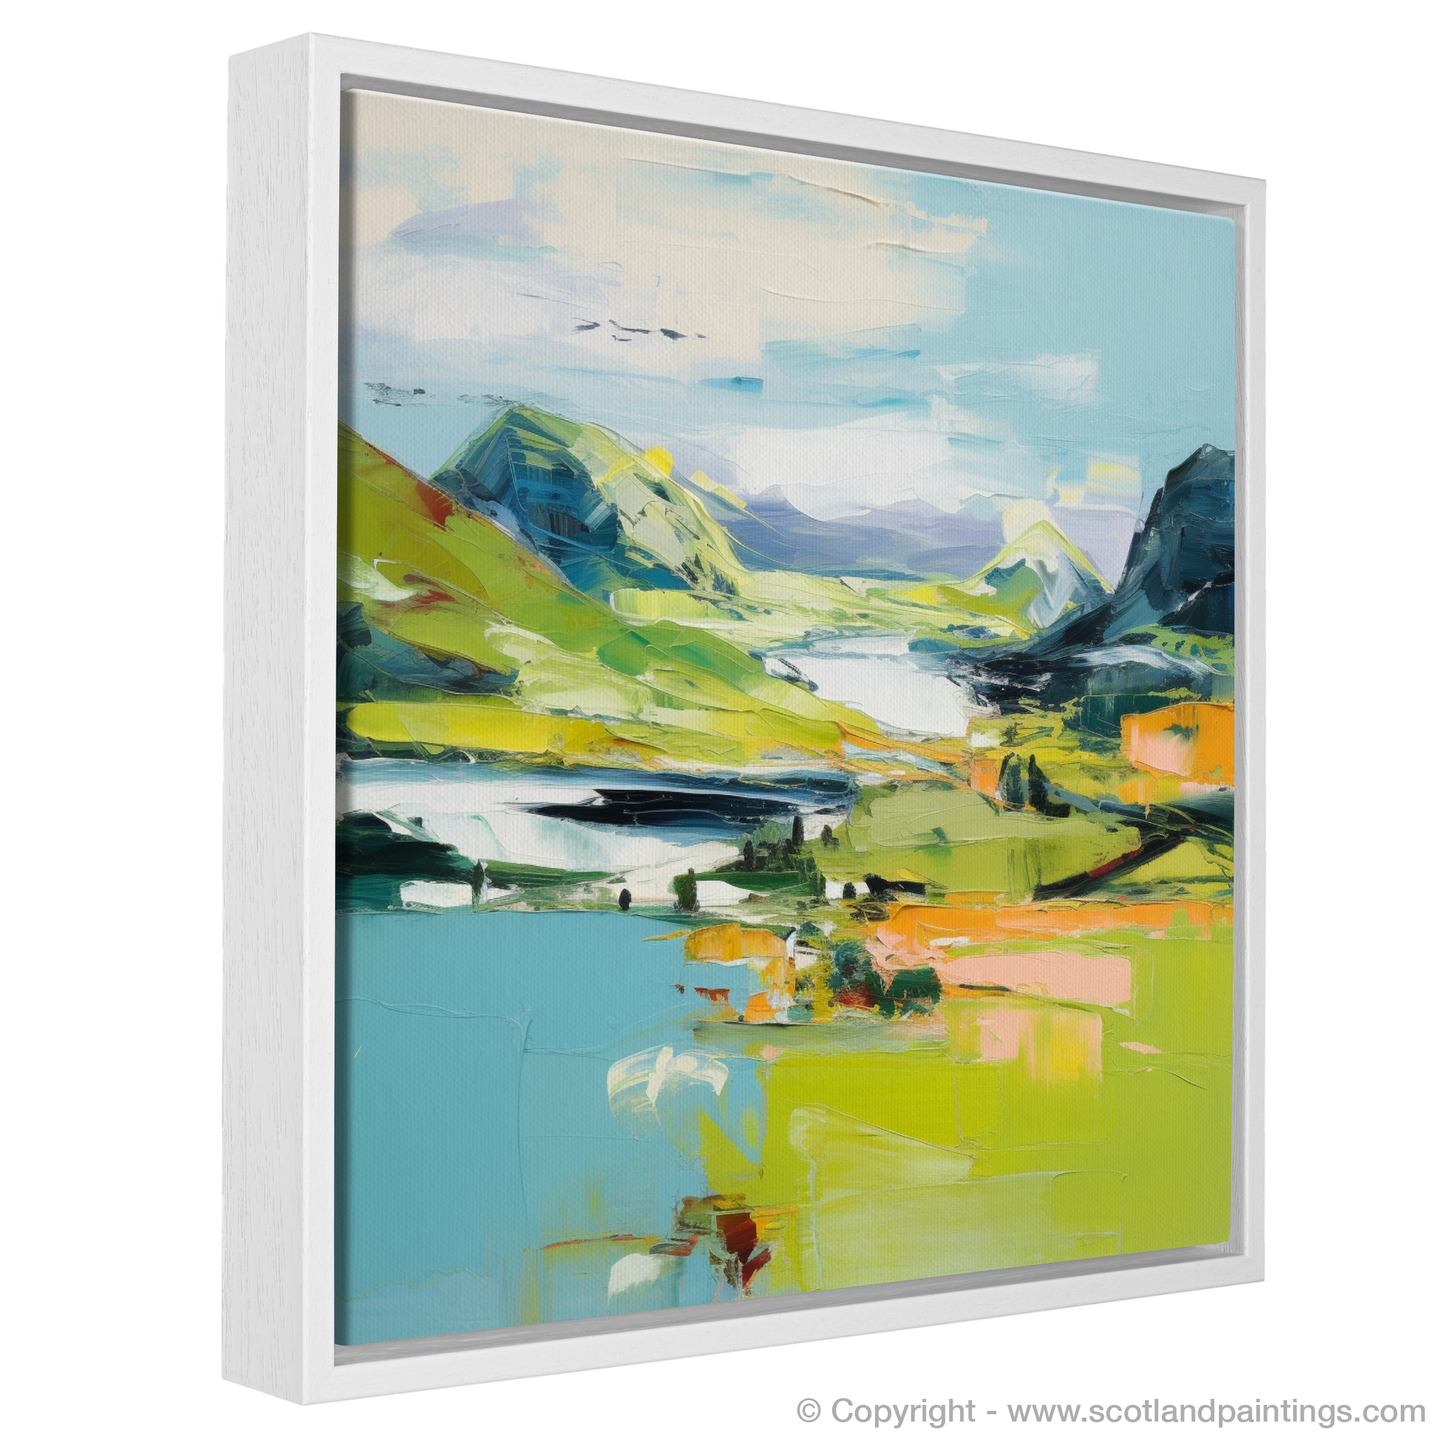 Painting and Art Print of Loch Glencoul, Sutherland in summer entitled "Summer Splendour at Loch Glencoul".